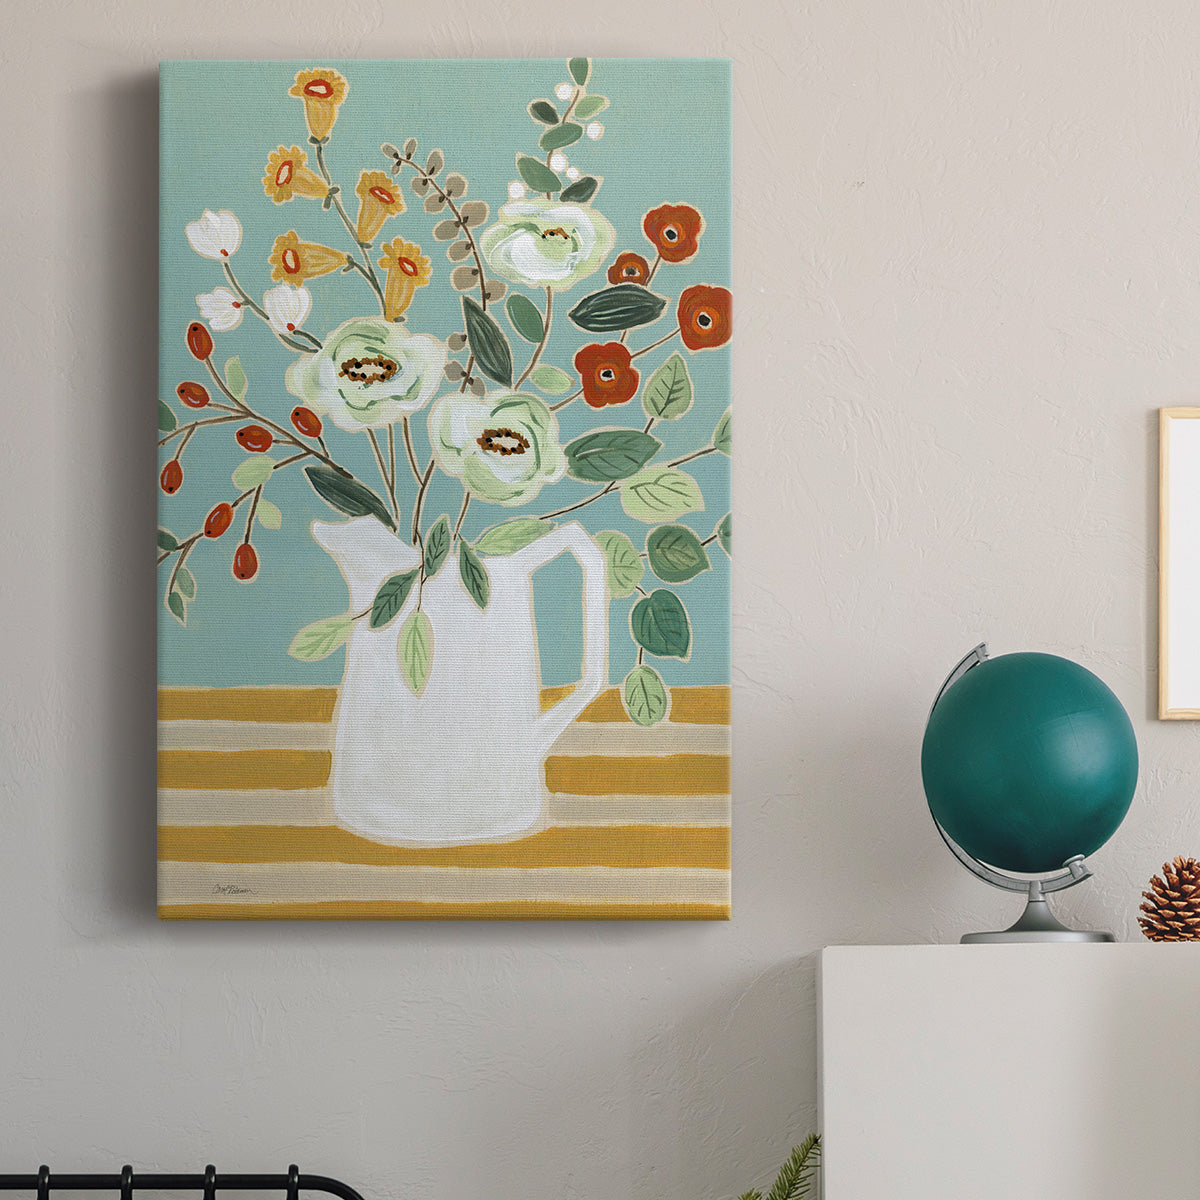 Joyful Blossoms II Premium Gallery Wrapped Canvas - Ready to Hang